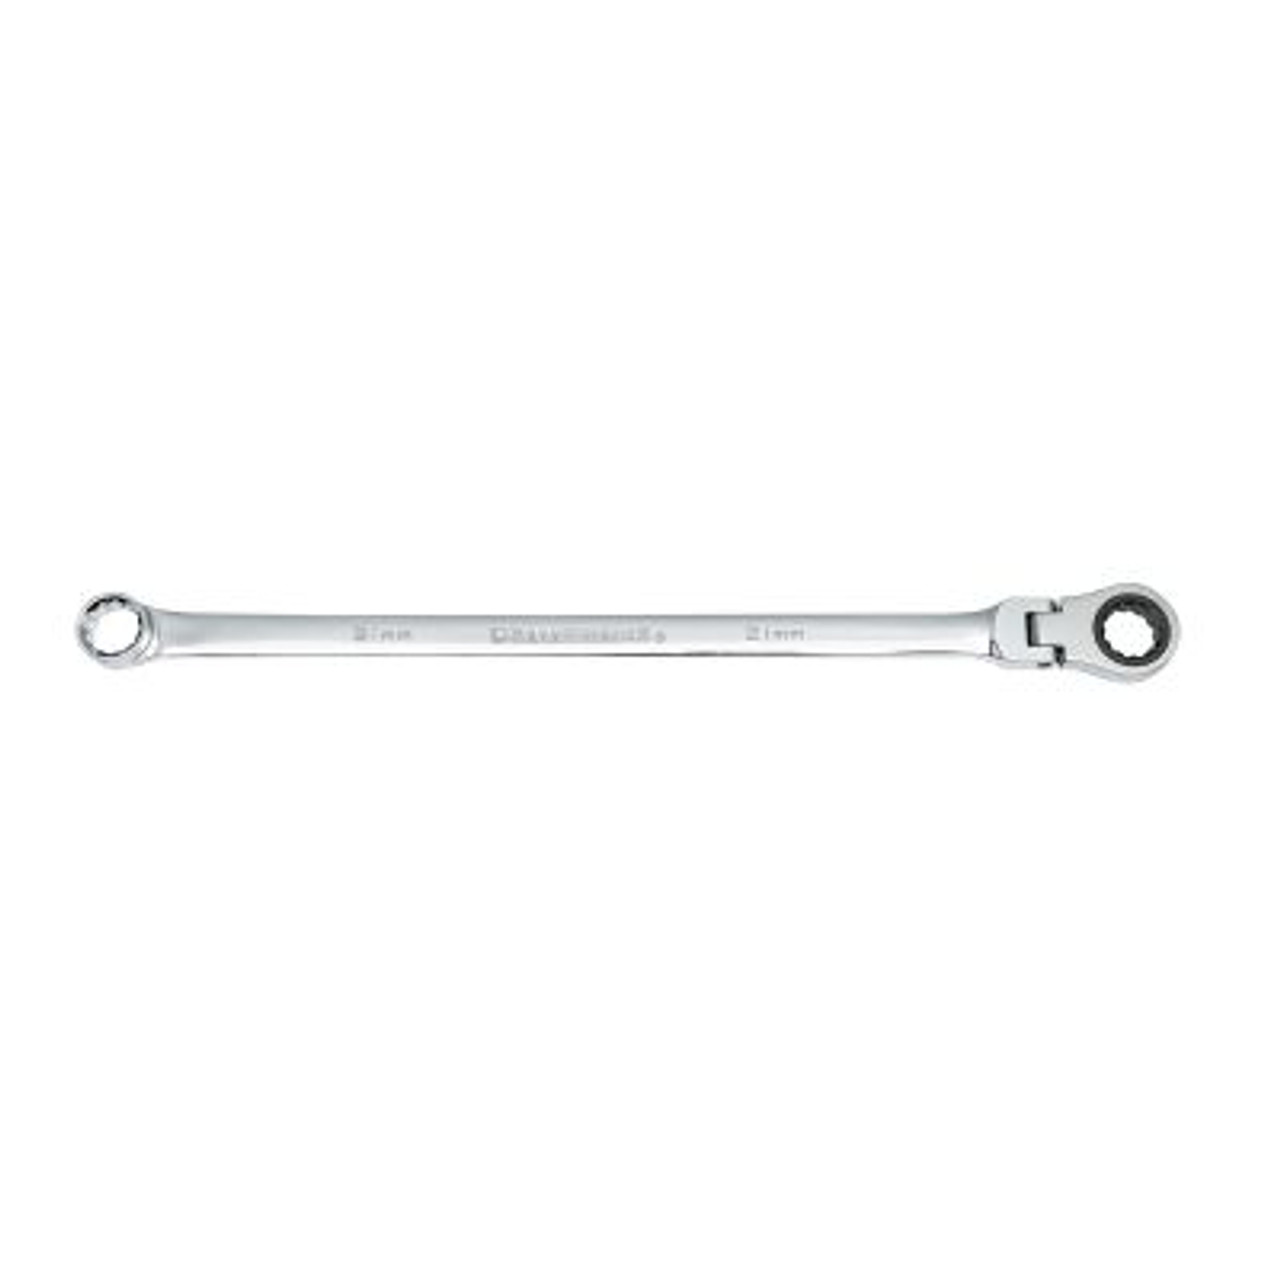 21mm Metric XL Flex Head GearBox Ratcheting Wrench DirectLift Canada